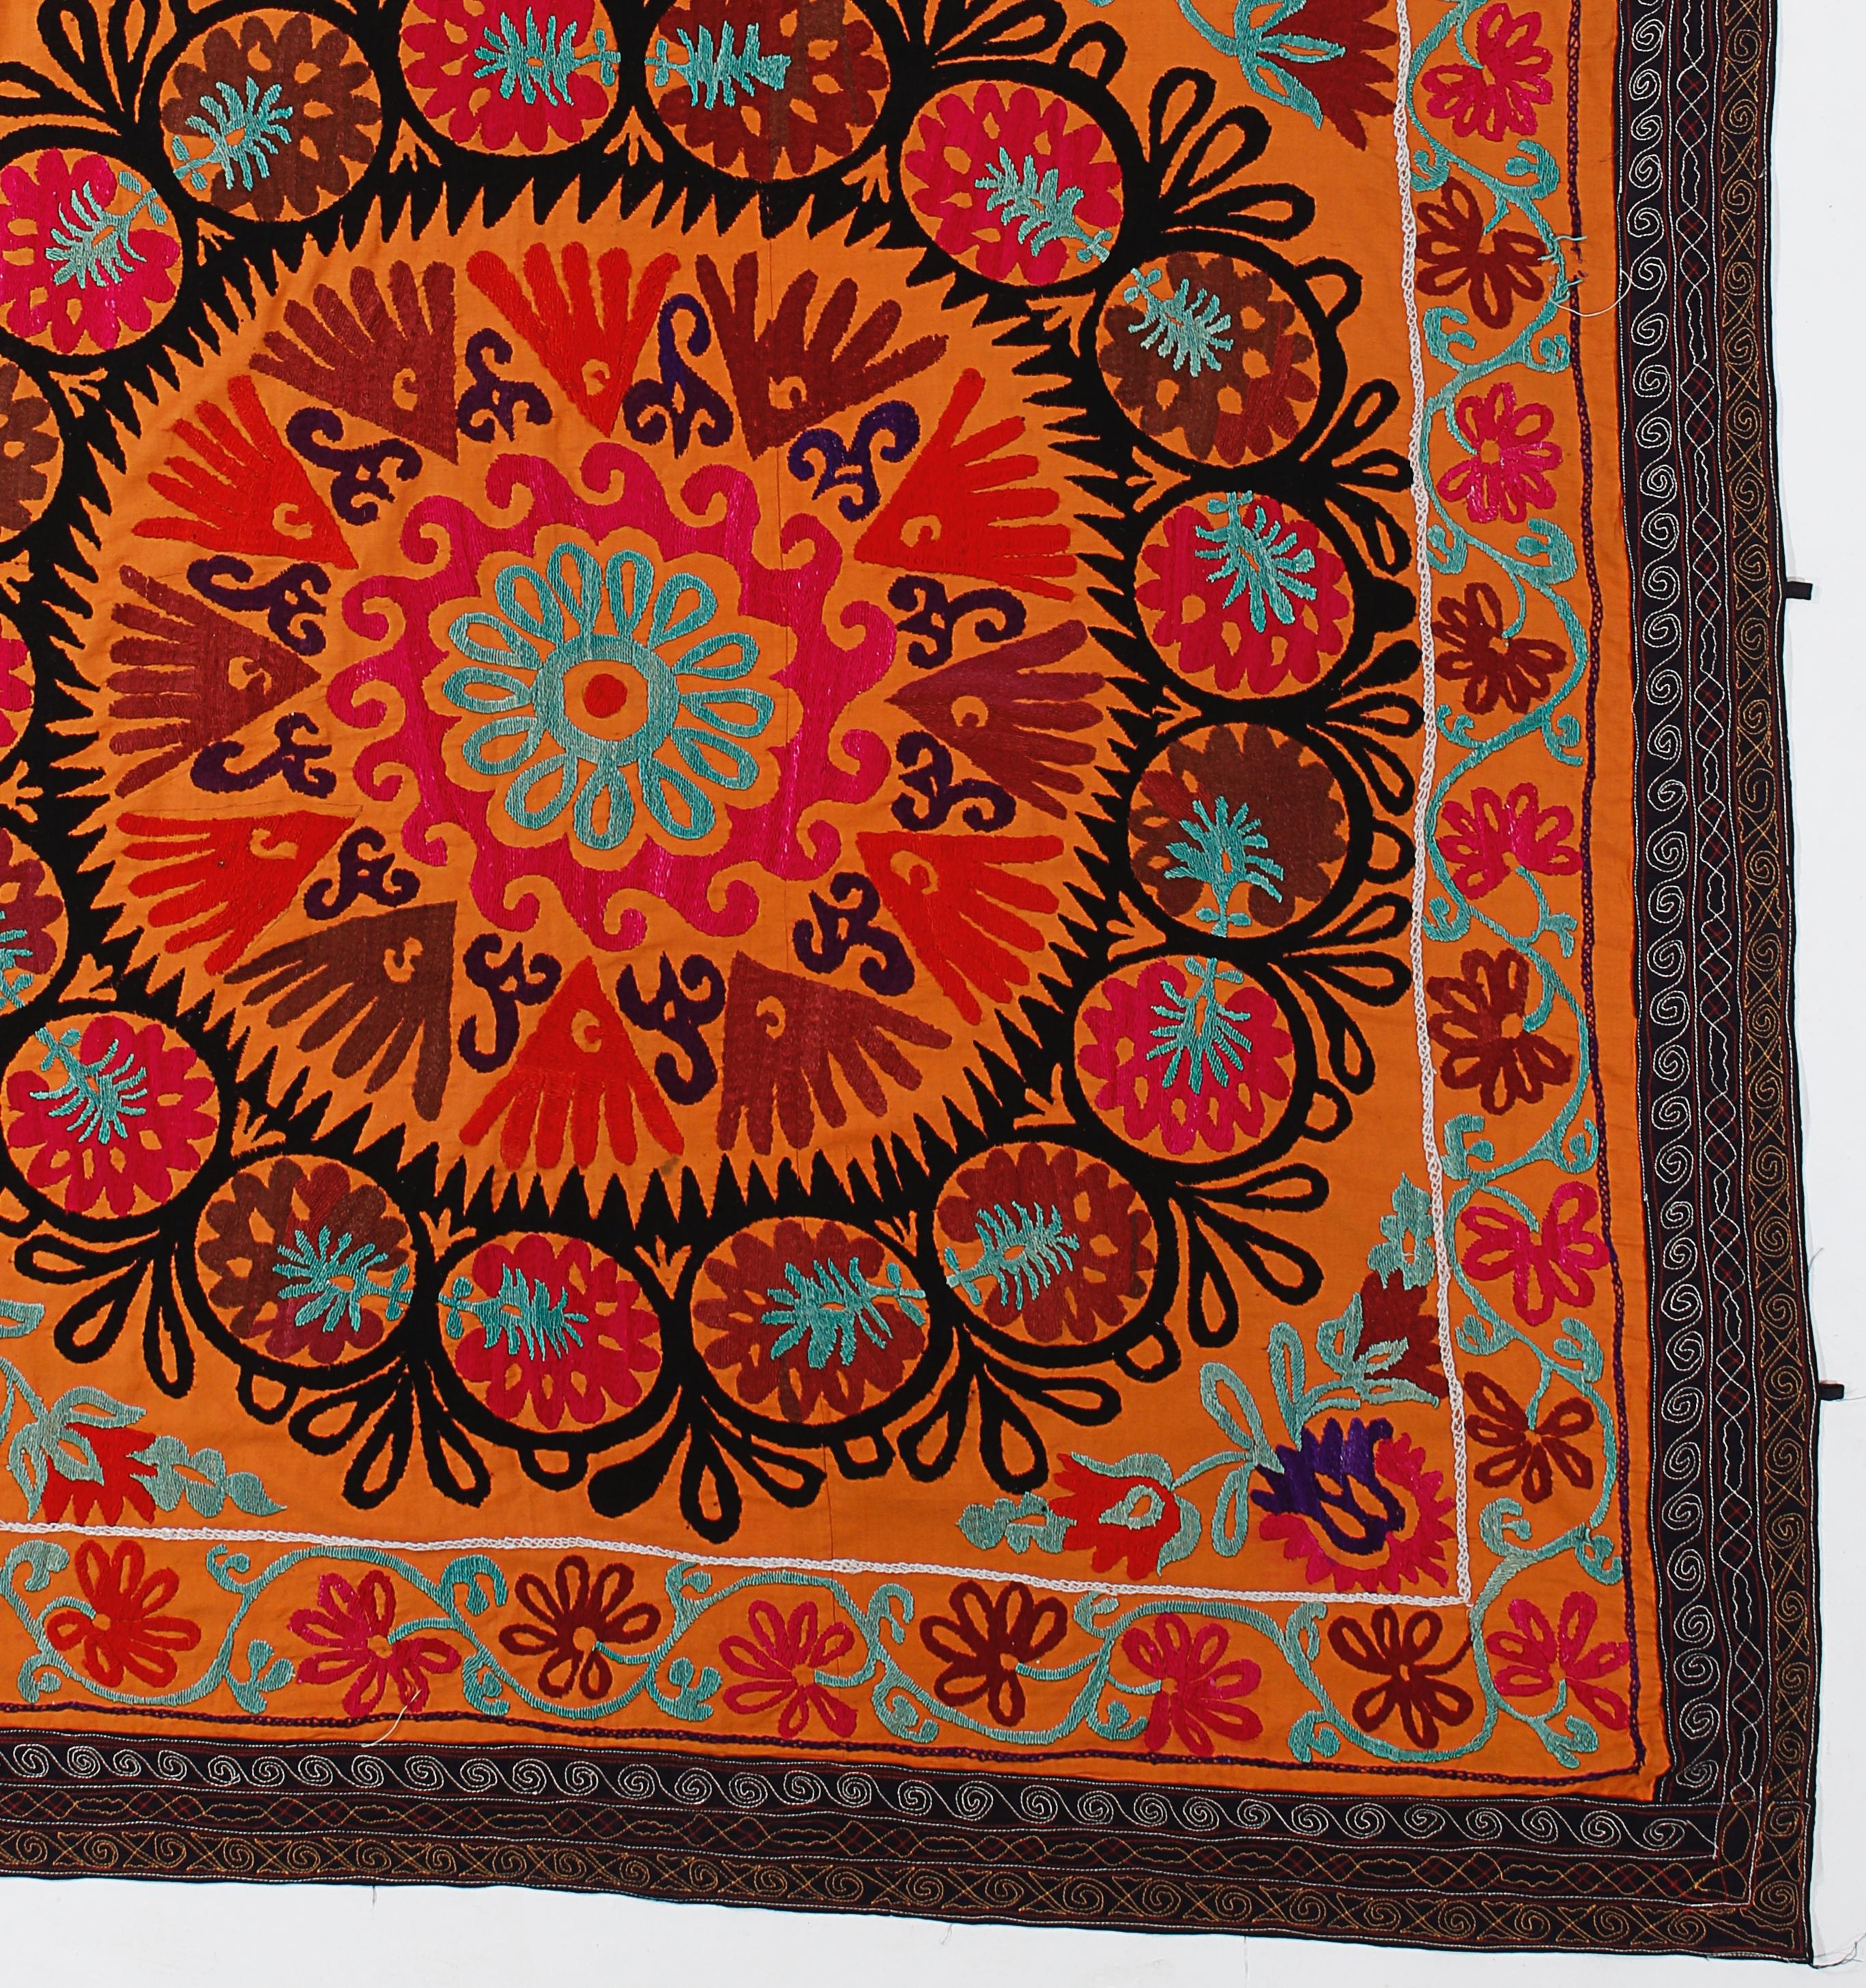 Uzbek Vintage Needlework Bed Cover. Wall Decor Fabric. Silk Embroidered Orange Throw For Sale